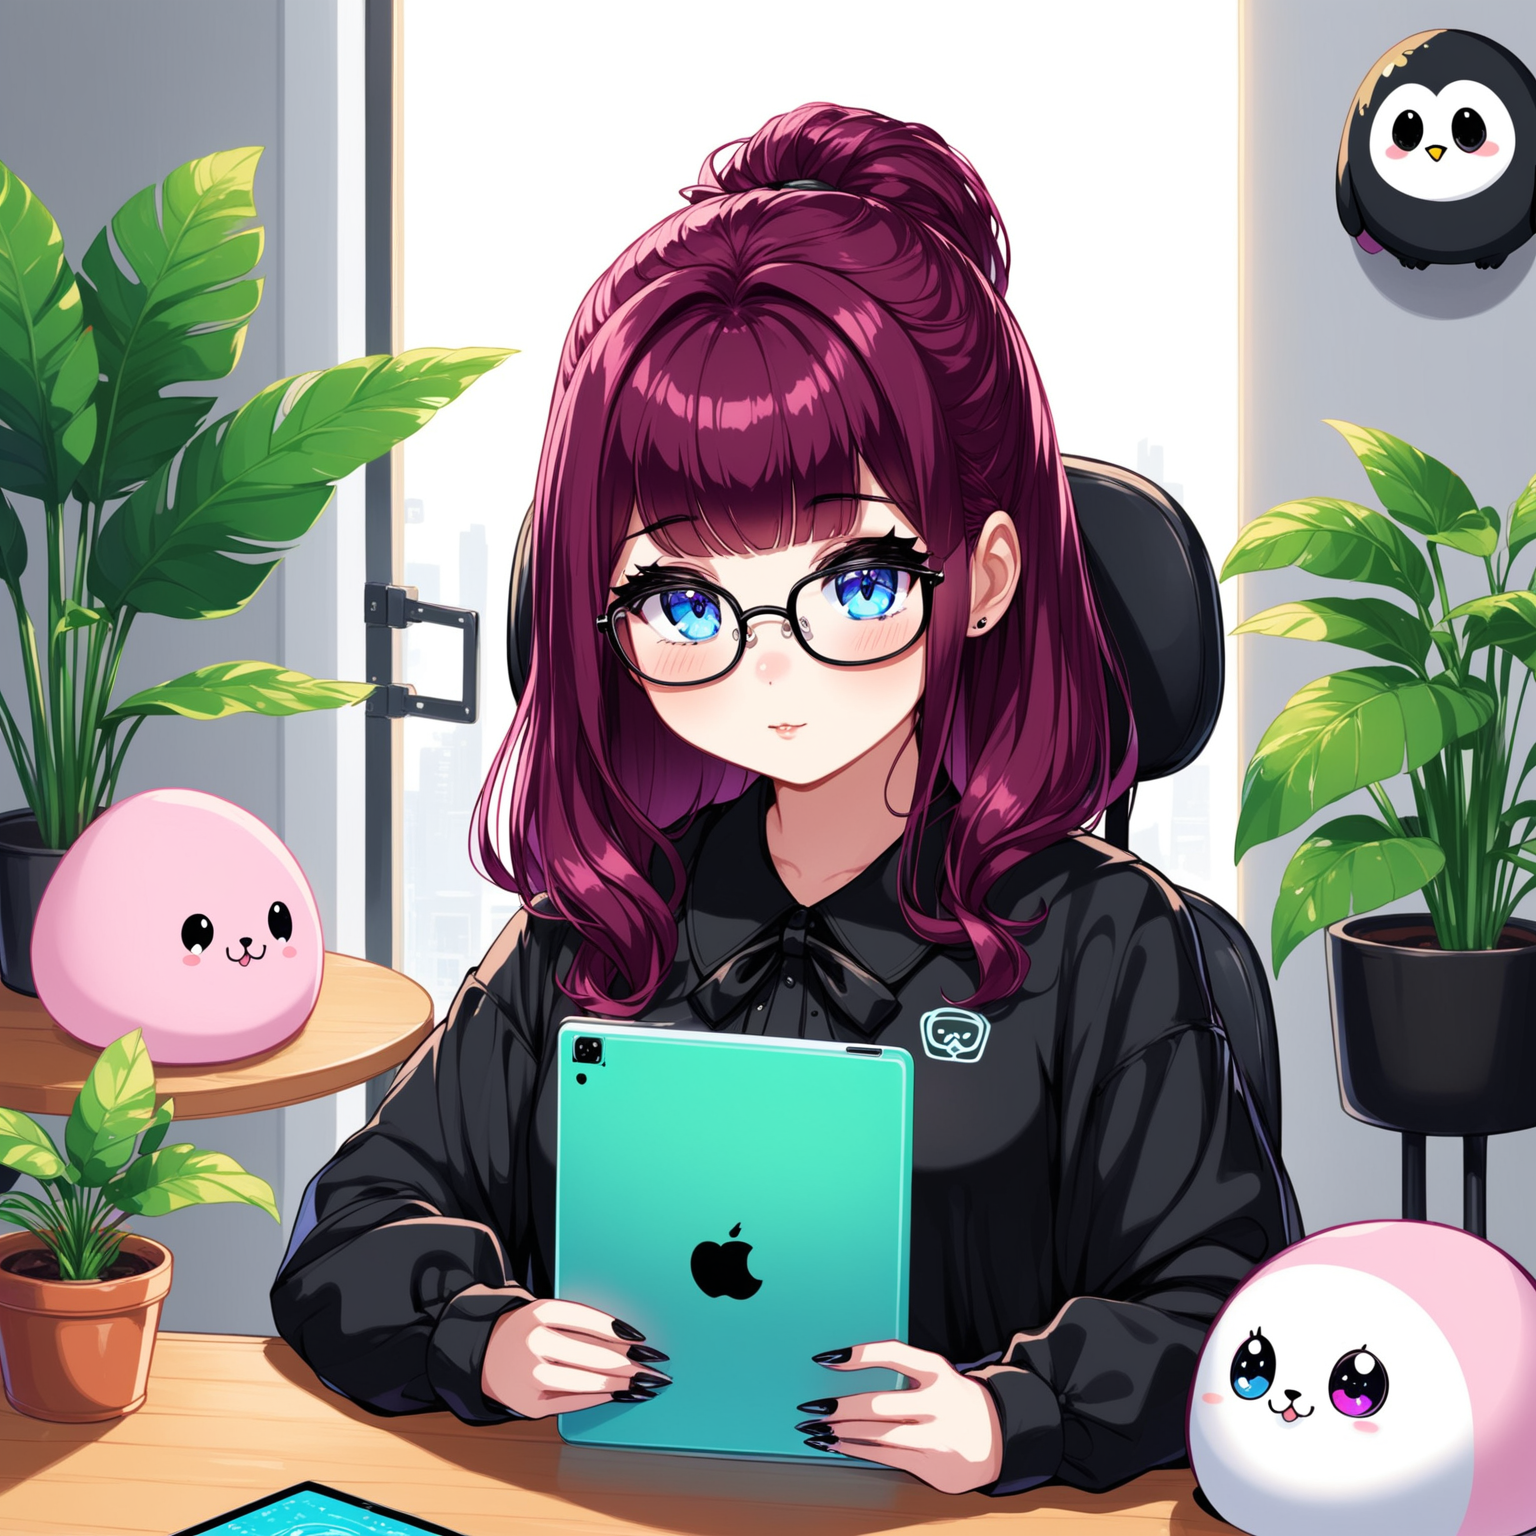 Nerdy Goth Girl with Burgundy Hair Working on Tablet Surrounded by Squishmallows